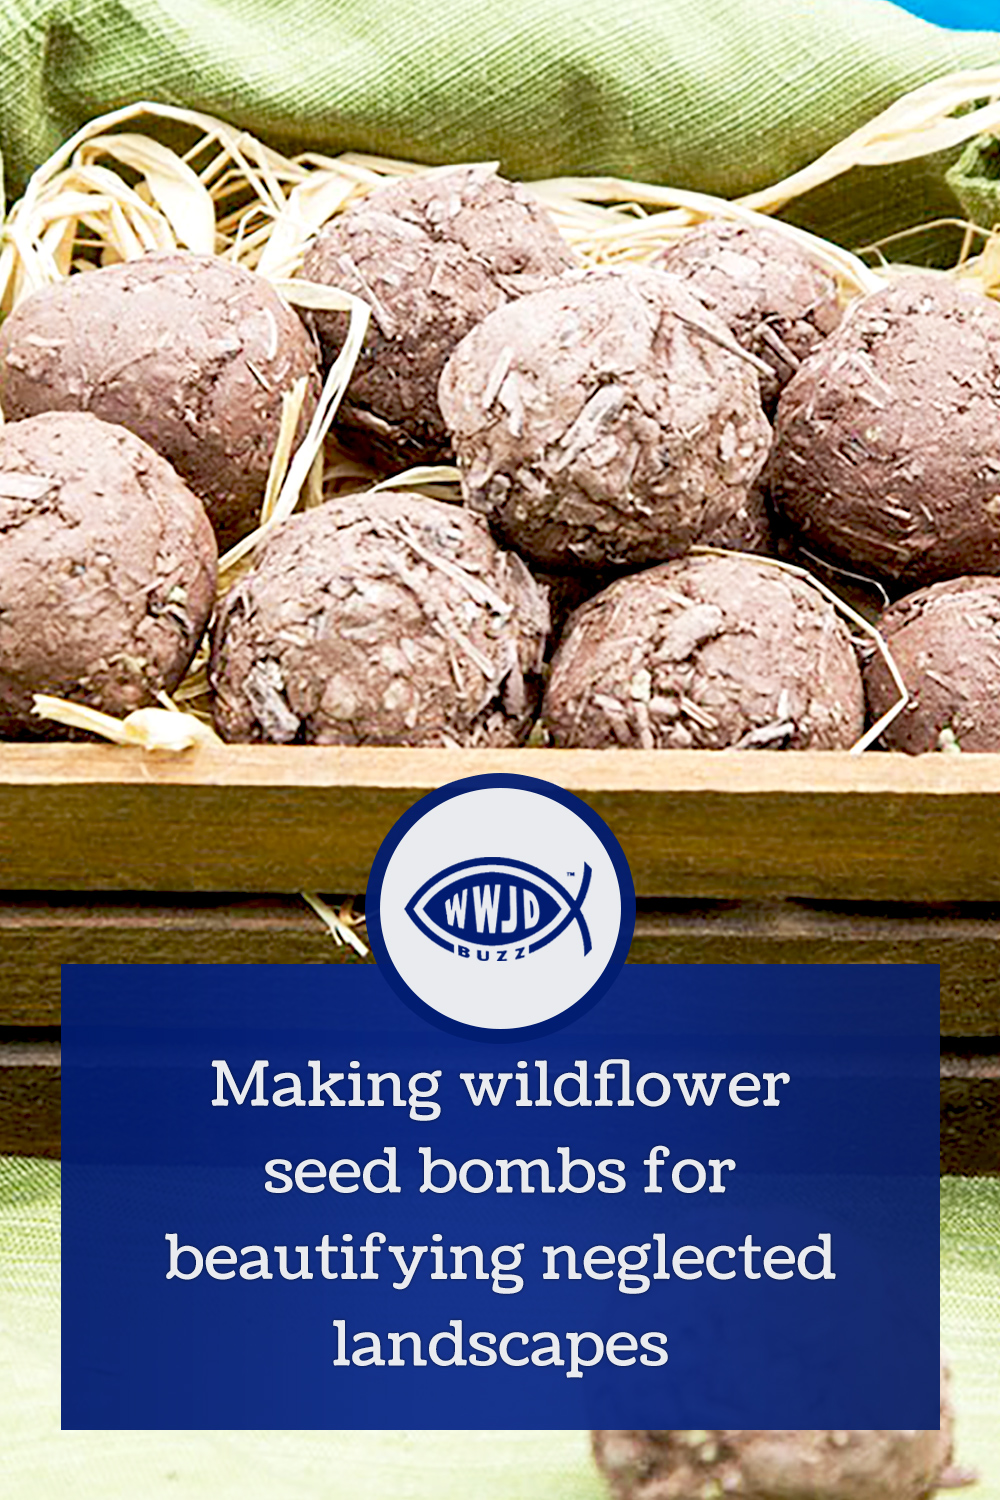 Making wildflower seed bombs for beautifying neglected landscapes